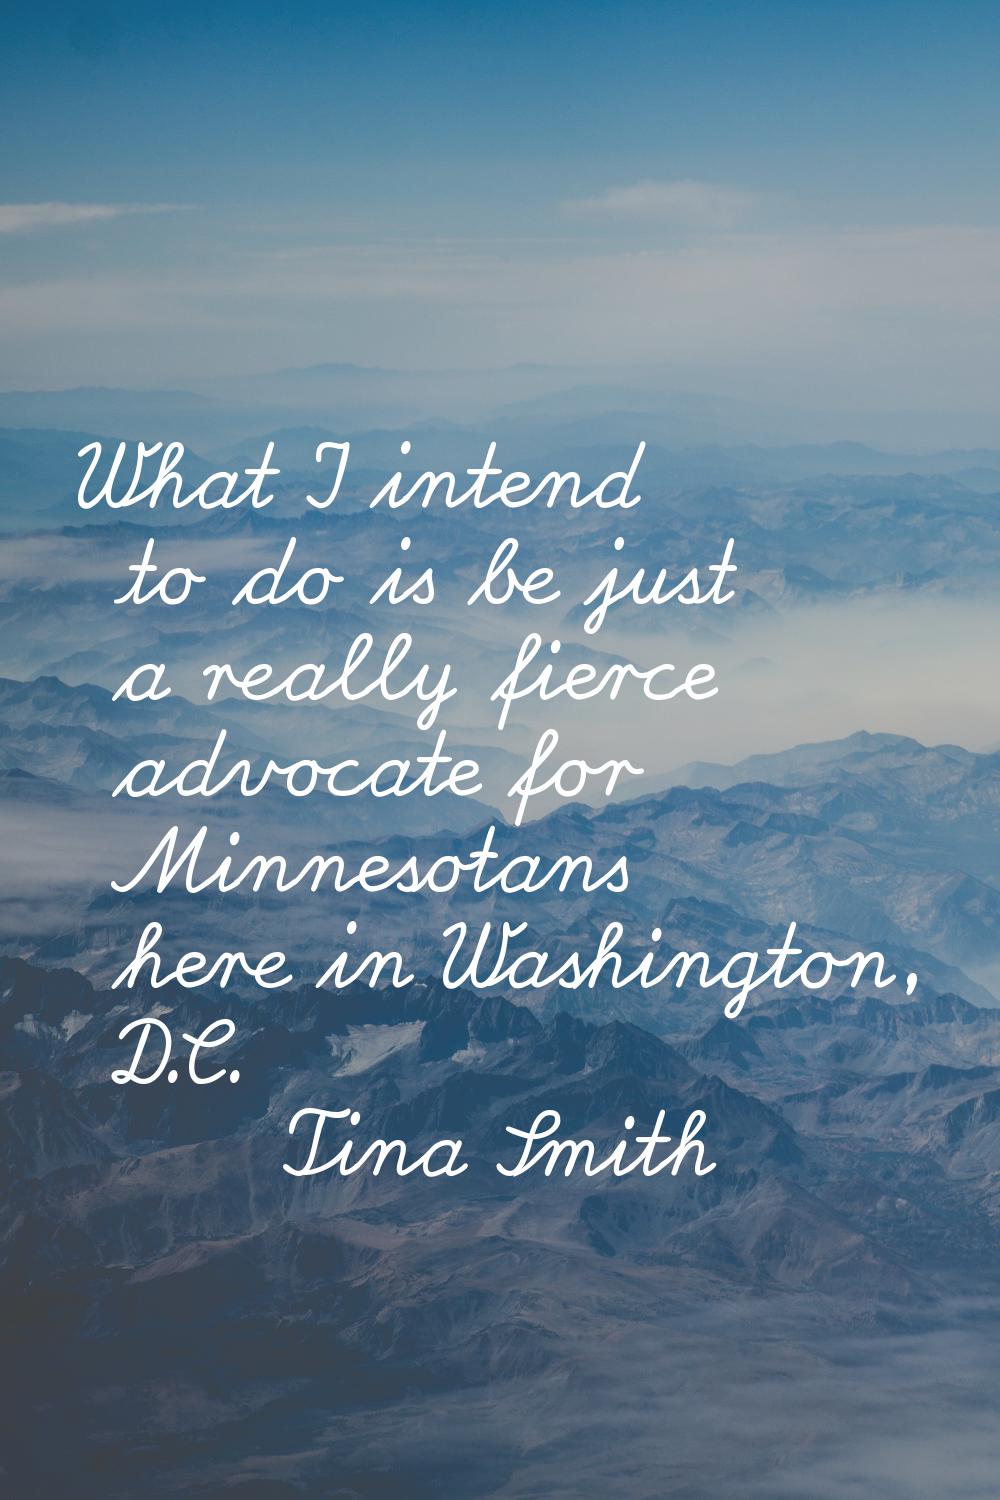 What I intend to do is be just a really fierce advocate for Minnesotans here in Washington, D.C.